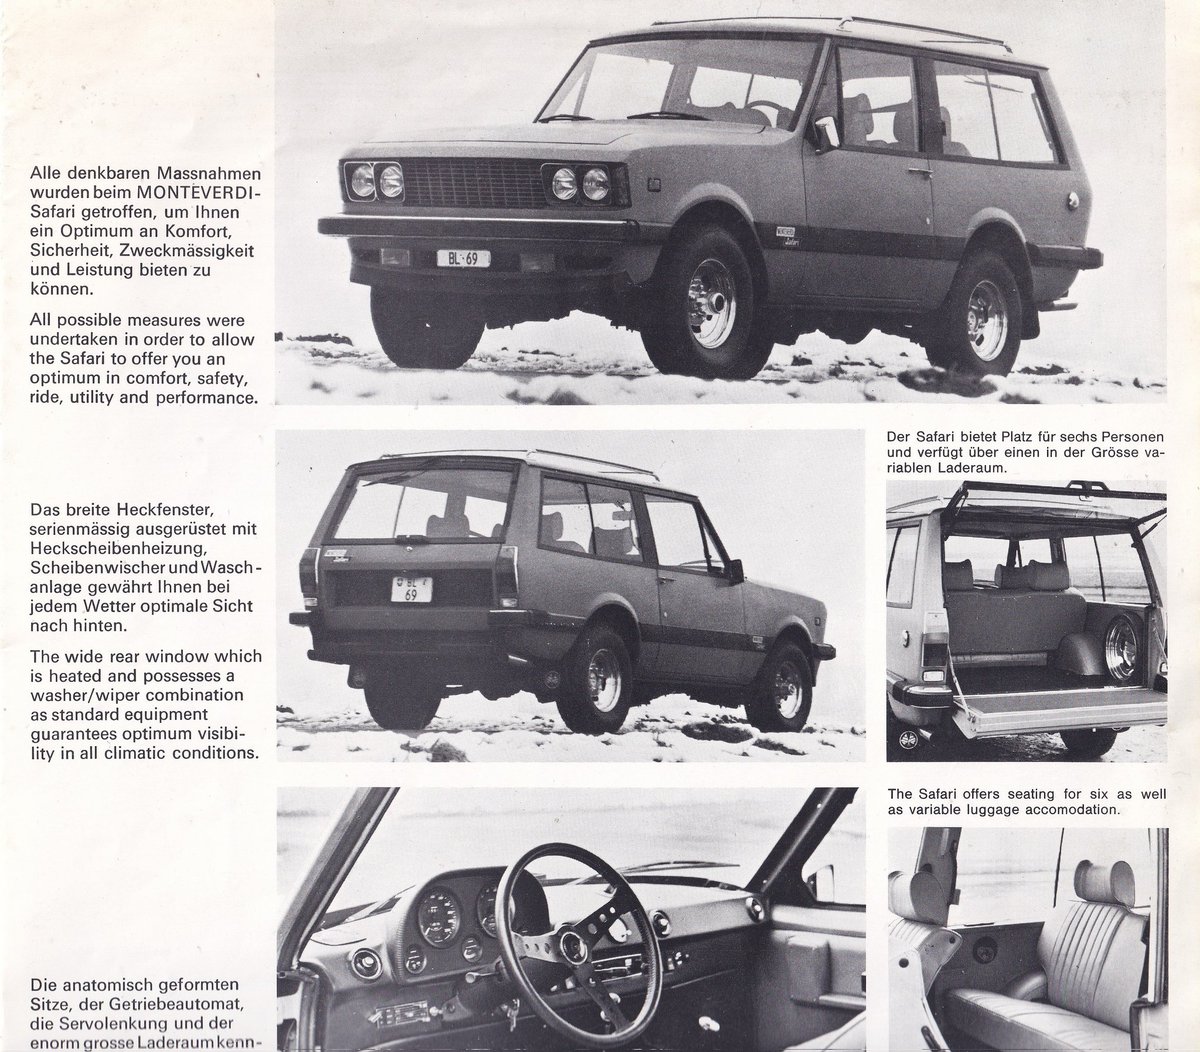 Swiss marque Monteverdi catered for buyers for whom money was no object. The 'impeccably equipped' Safari 4X4 in this 1977 brochure had angular Fissore styling, disguising the model's far humbler International Scout roots, and Chrysler V8 power. #carbrochure #Monteverdi